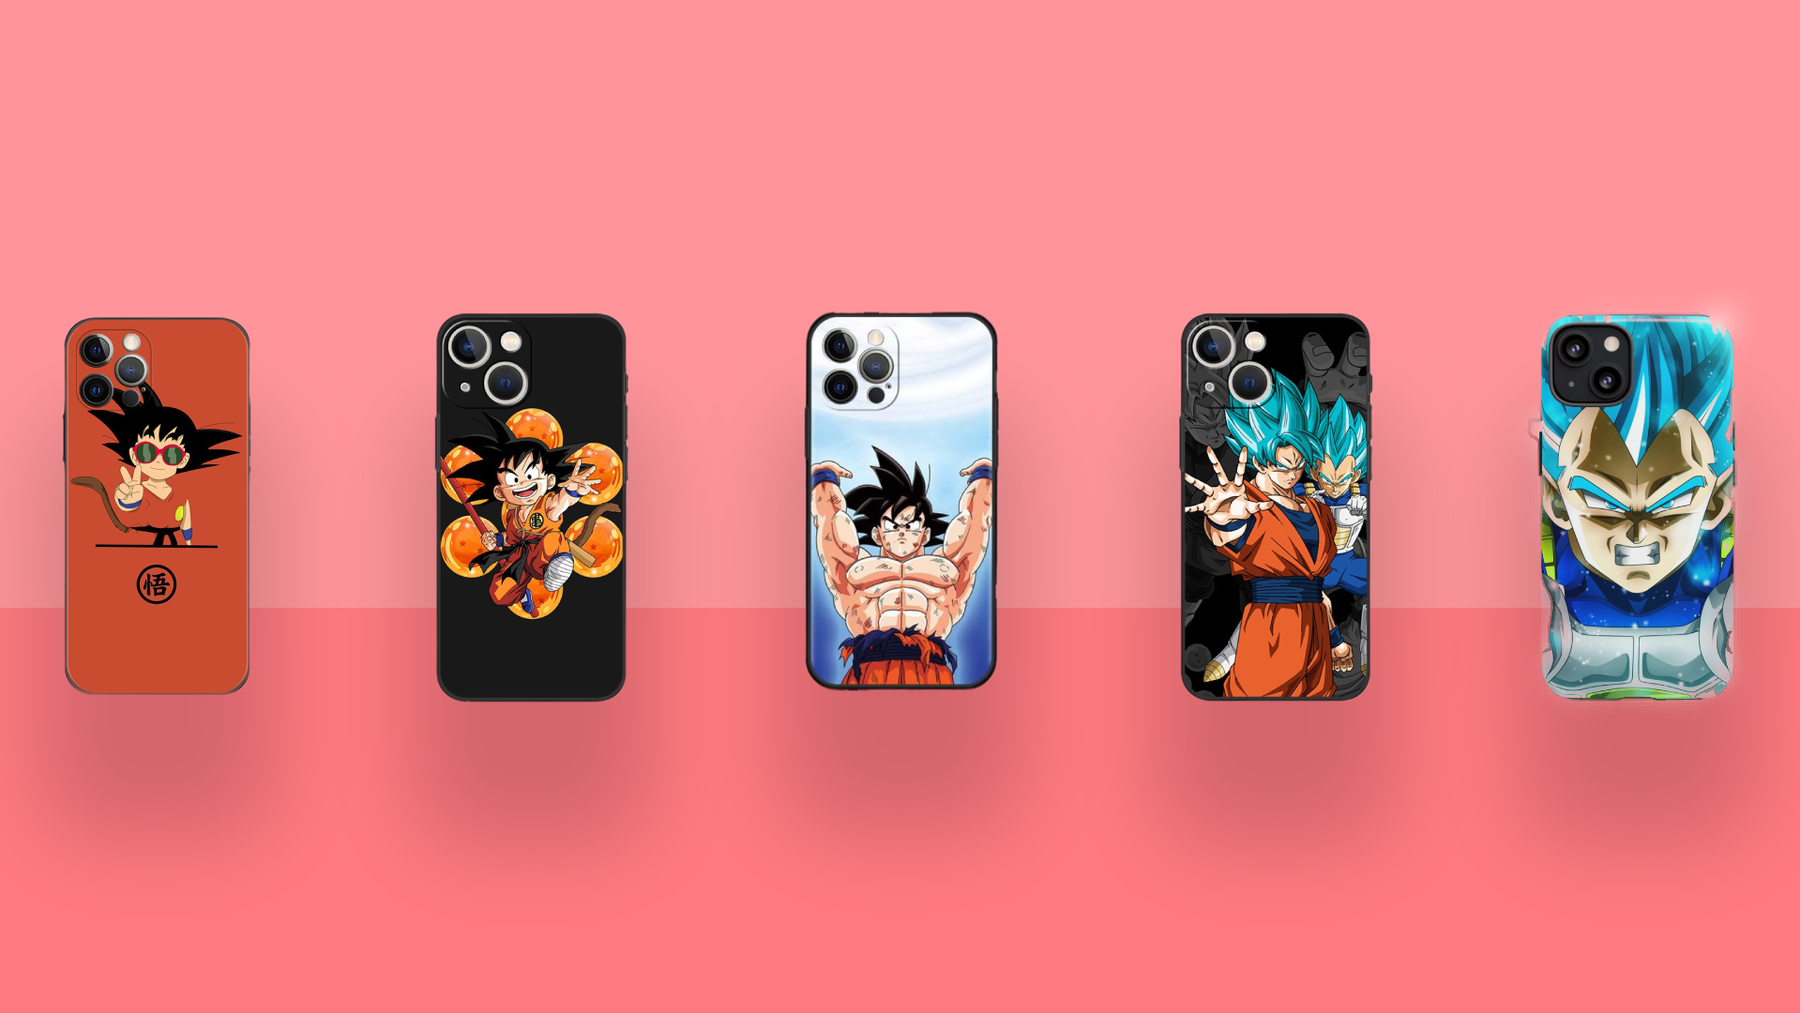 Show off your love for Dragon Ball Z with these iPhone cases